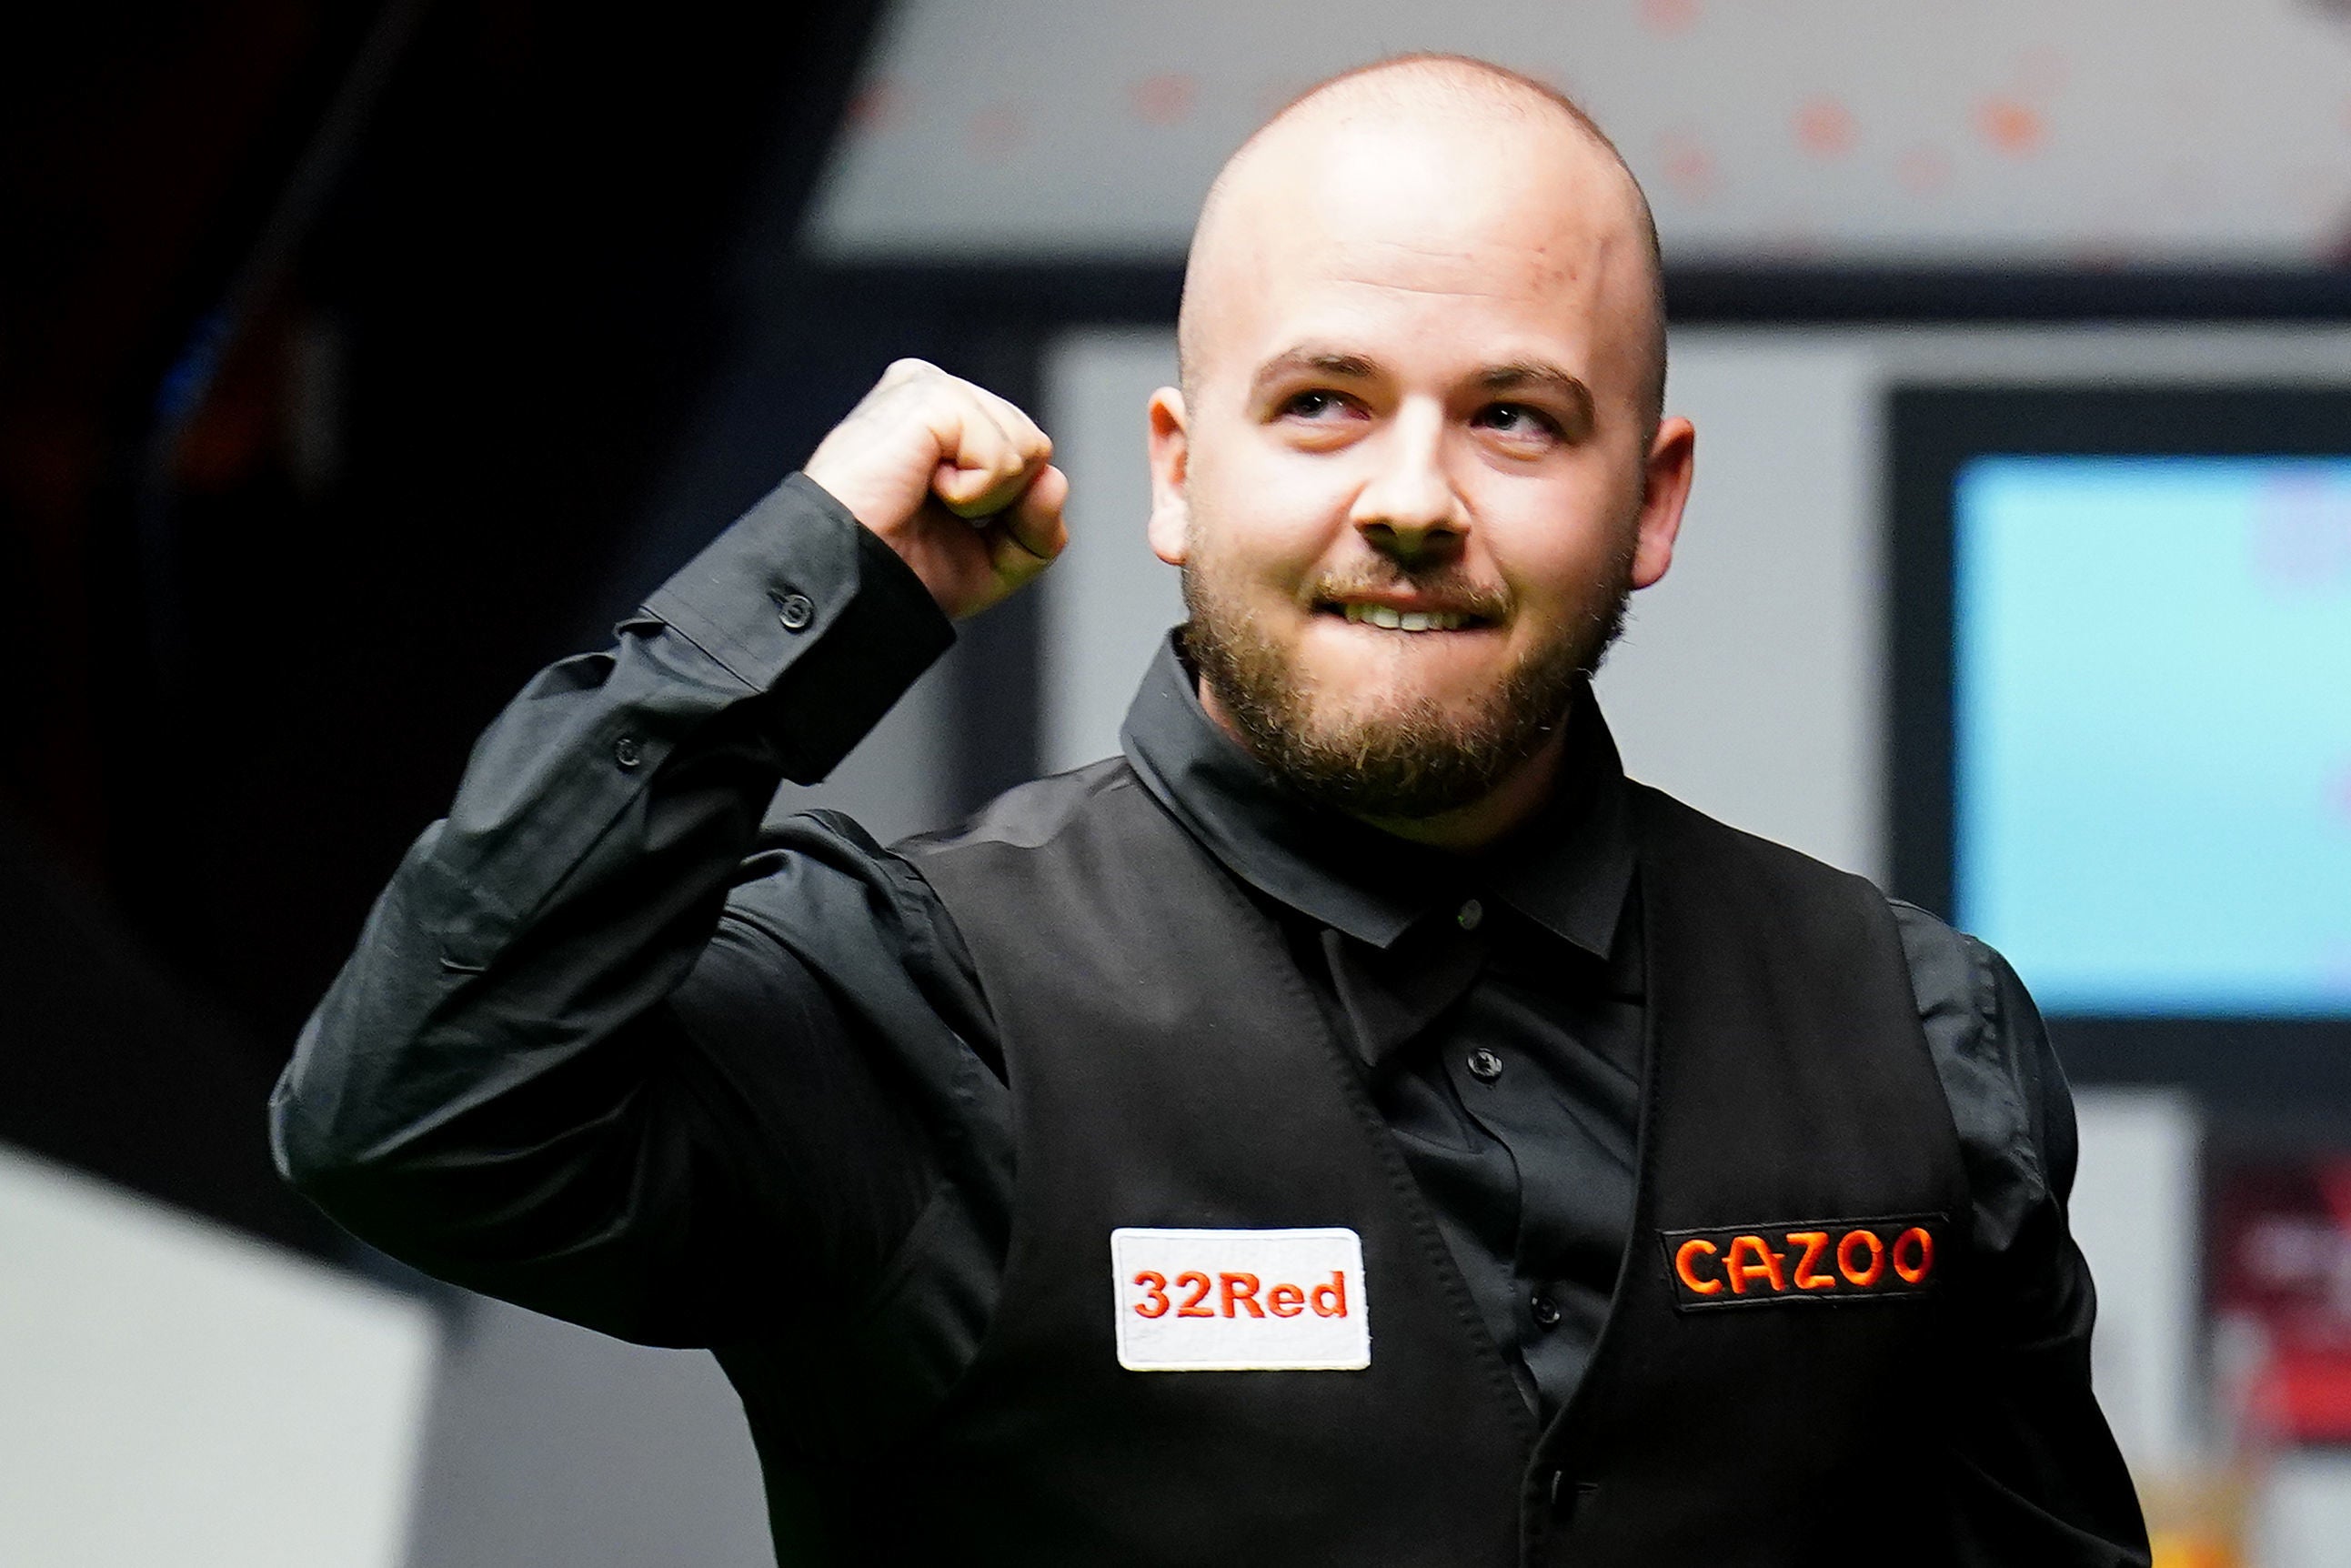 Luca Brecel stunned to pull off greatest-ever World Championship comeback